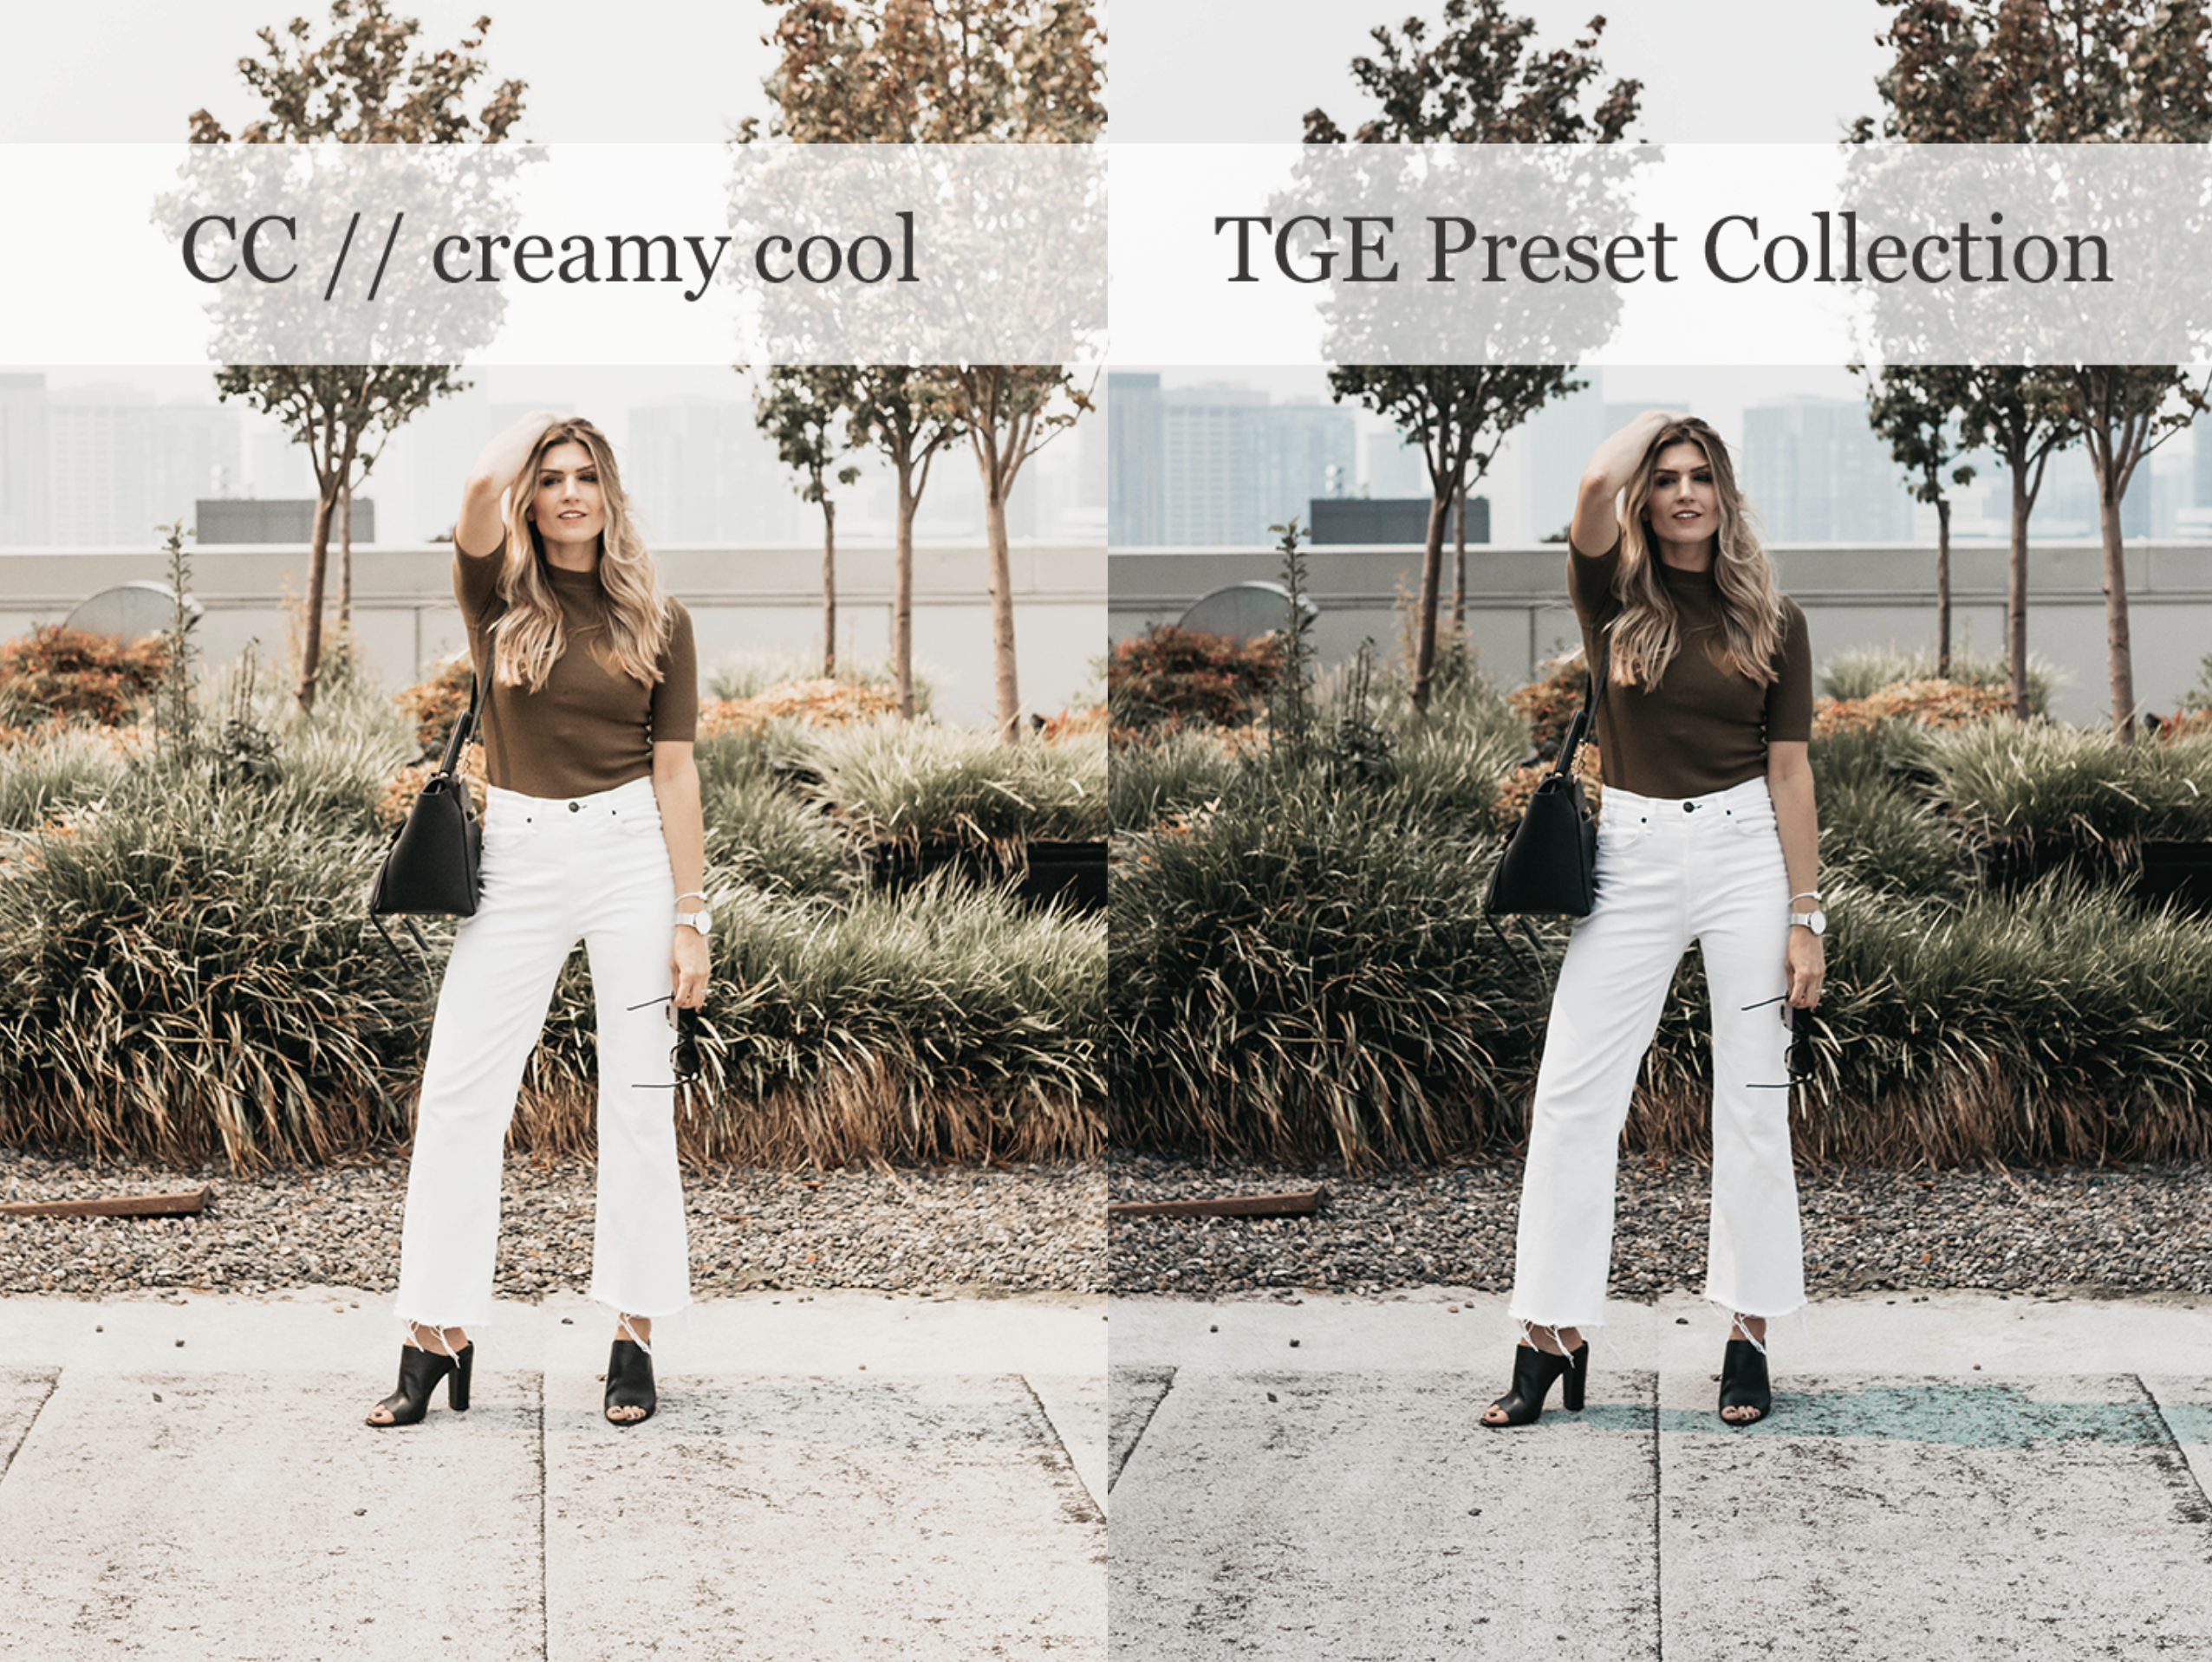 TGE Preset Collection | creamy cool